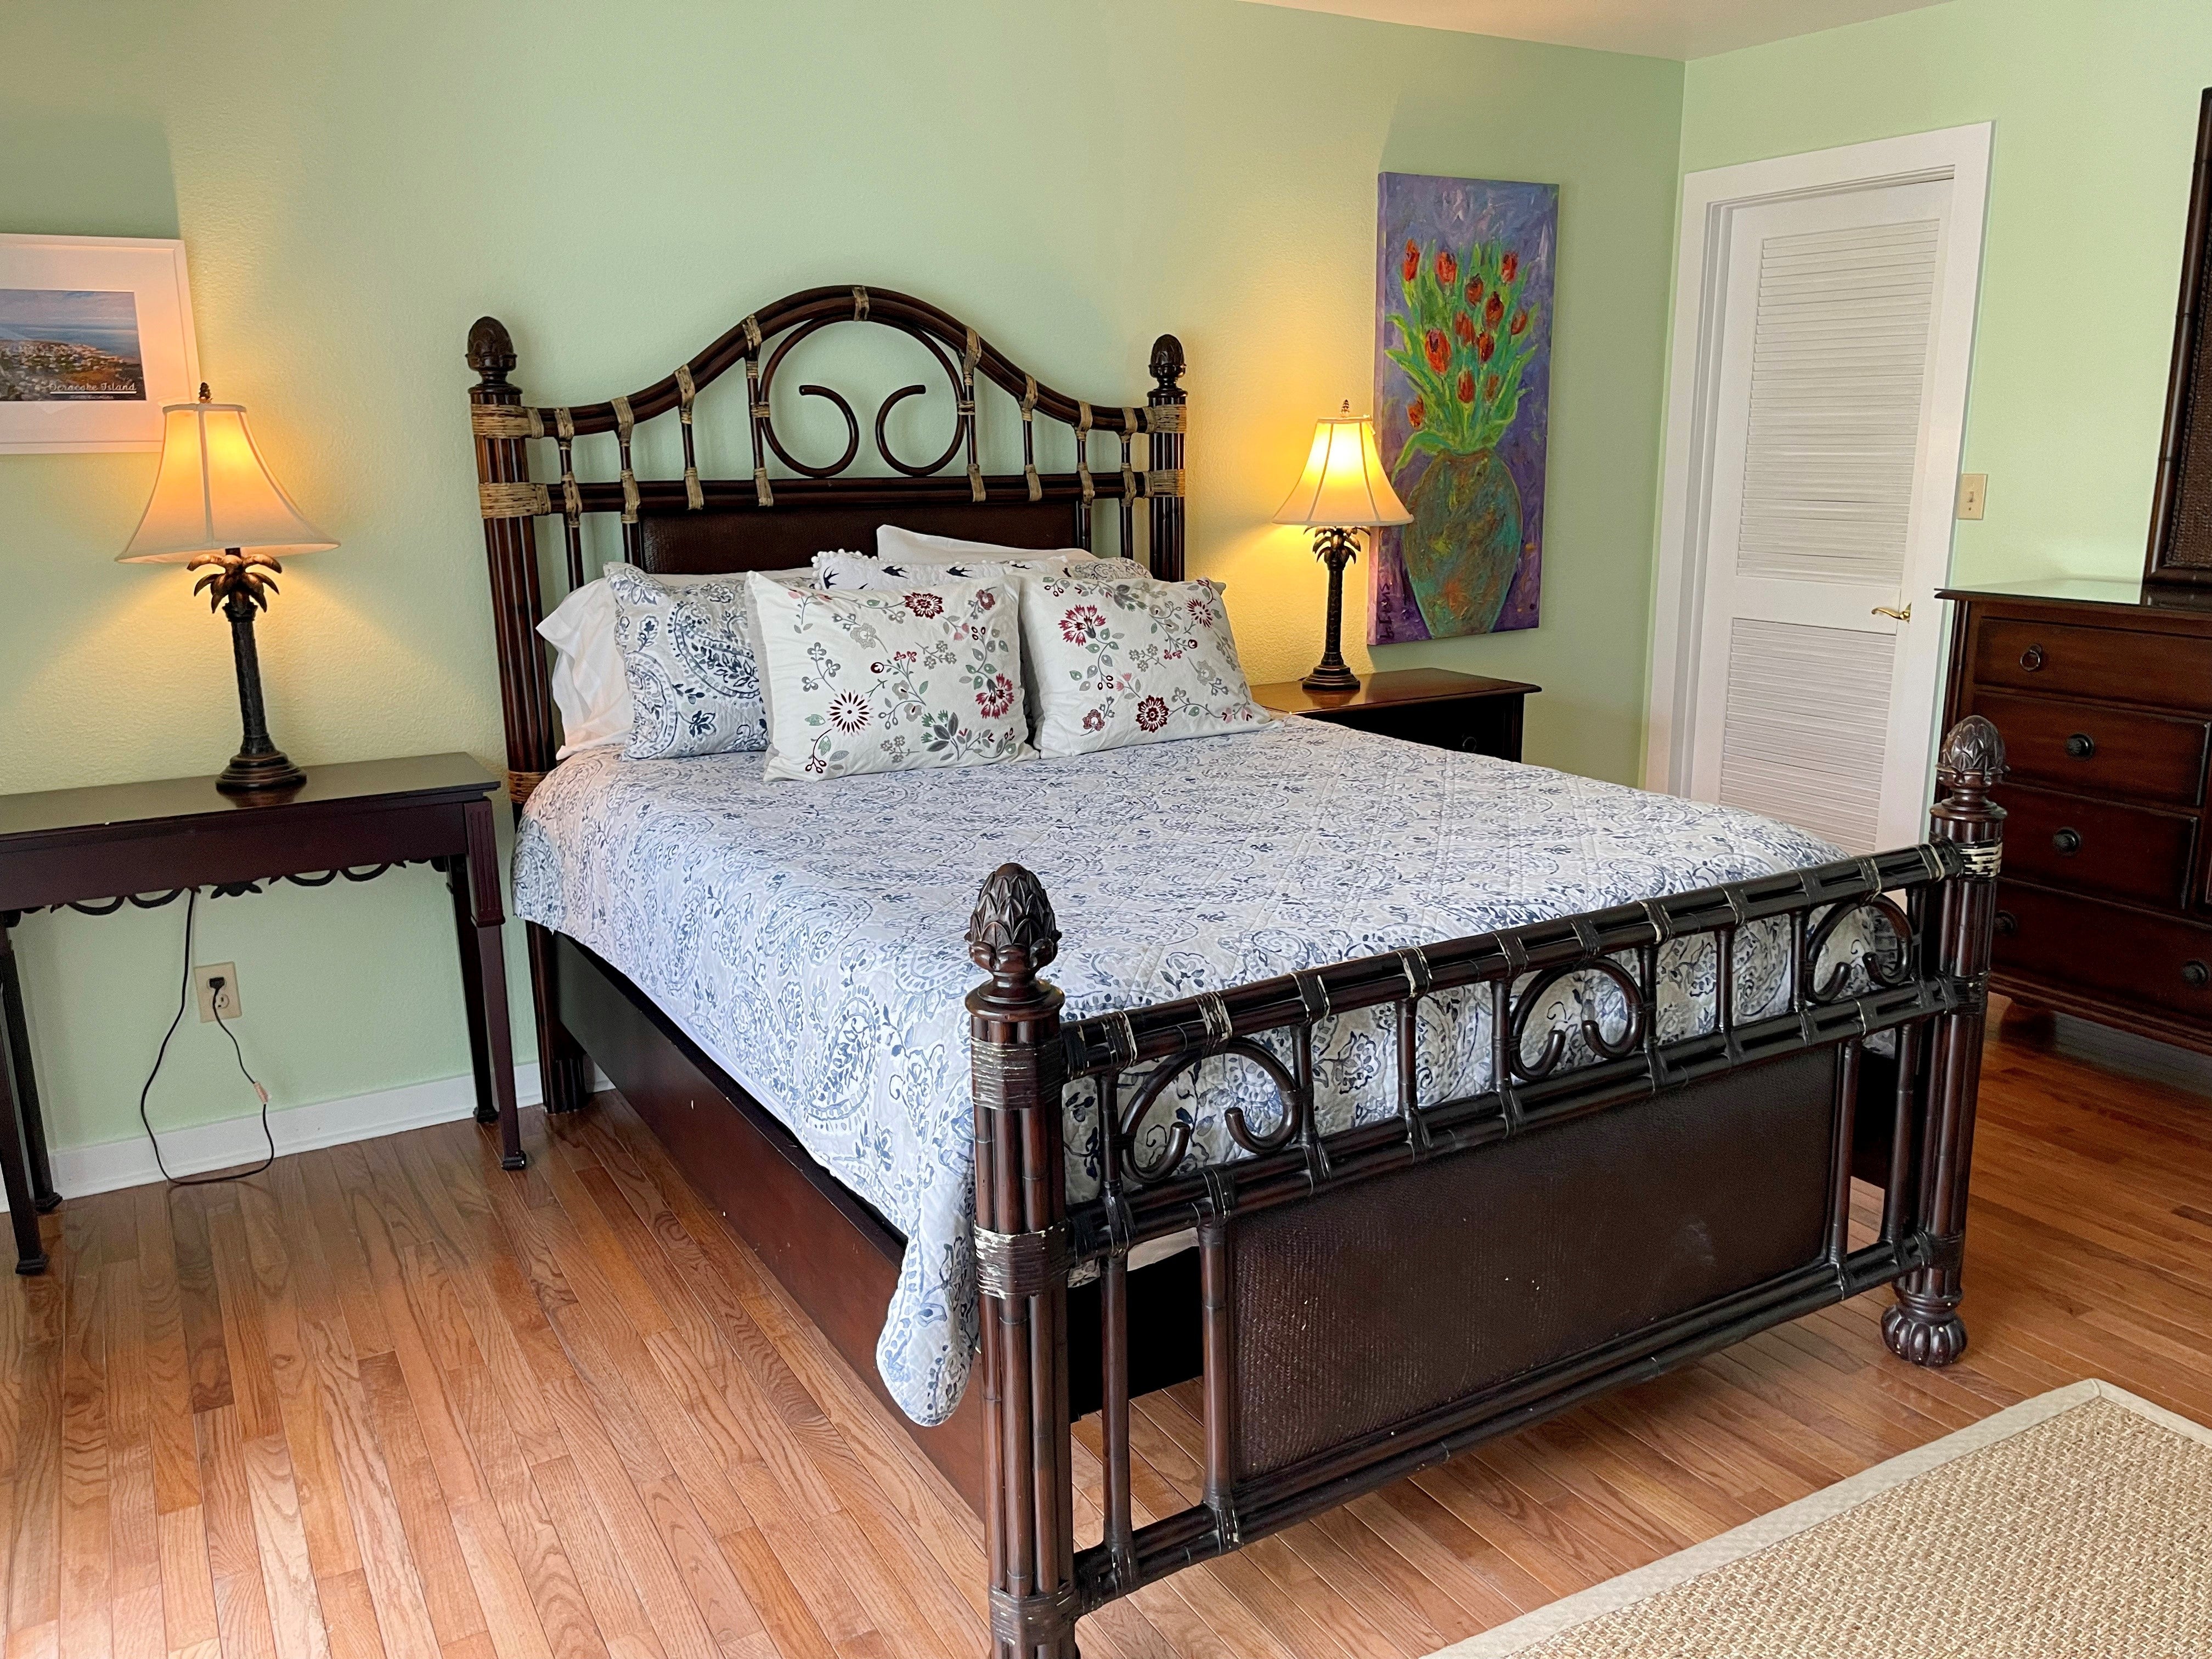 Queen Bed with TVDVD (in armoire), Main House with Deck Access